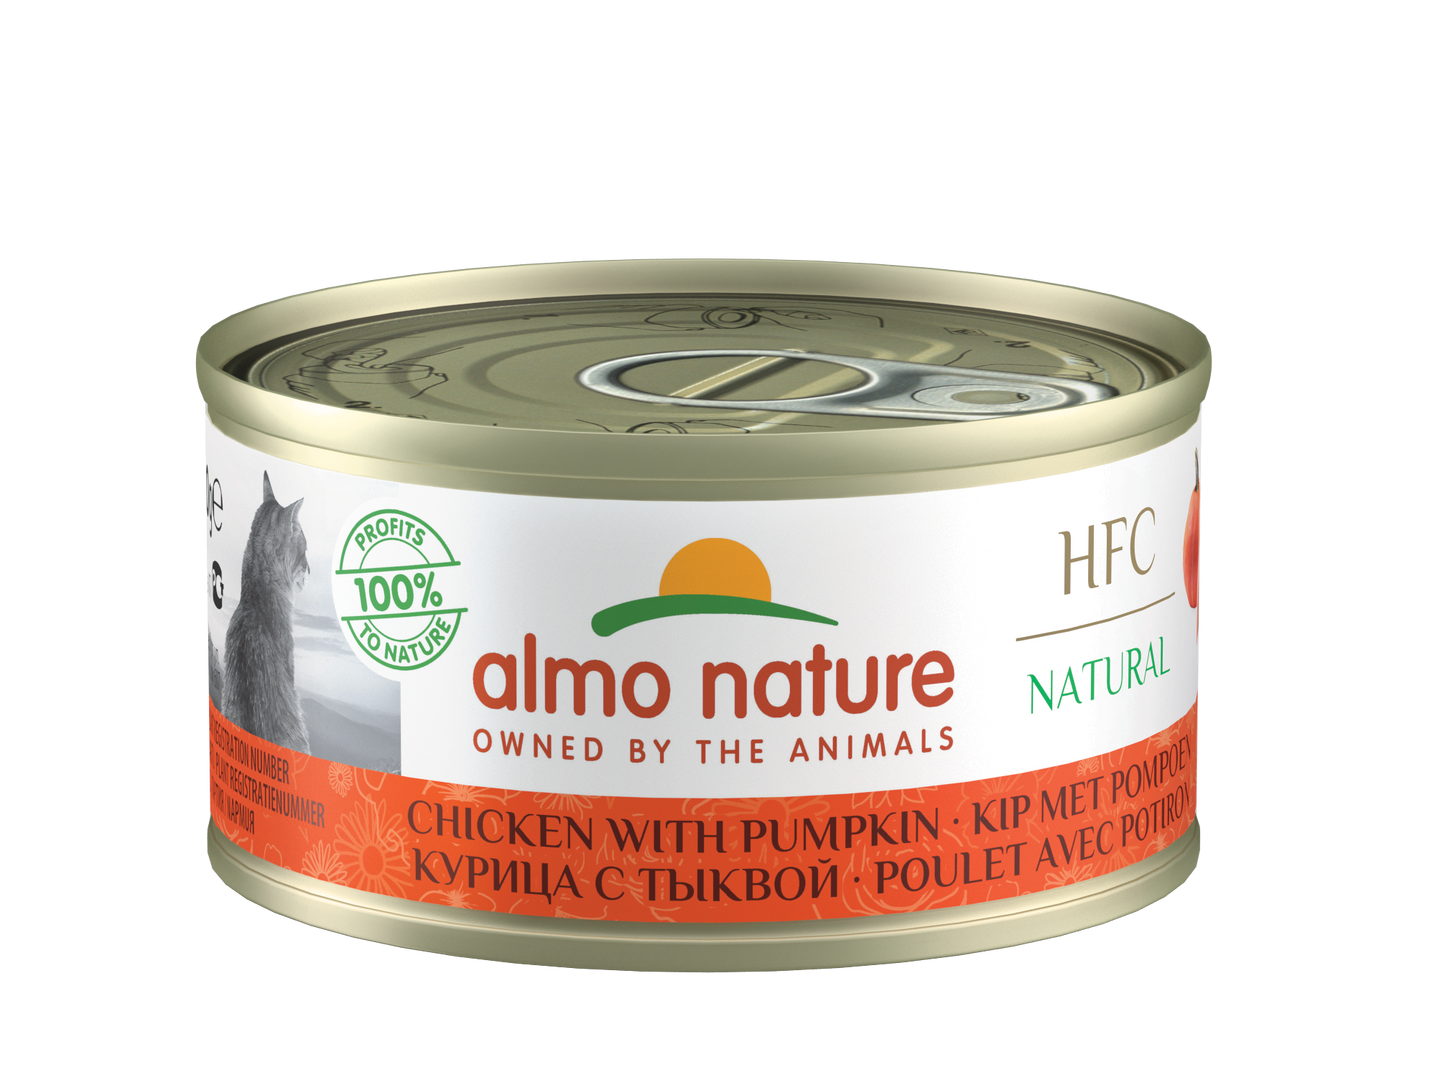 Almo Nature HFC Natural Canned Cat Food – Chicken with Pumpkin, 70g